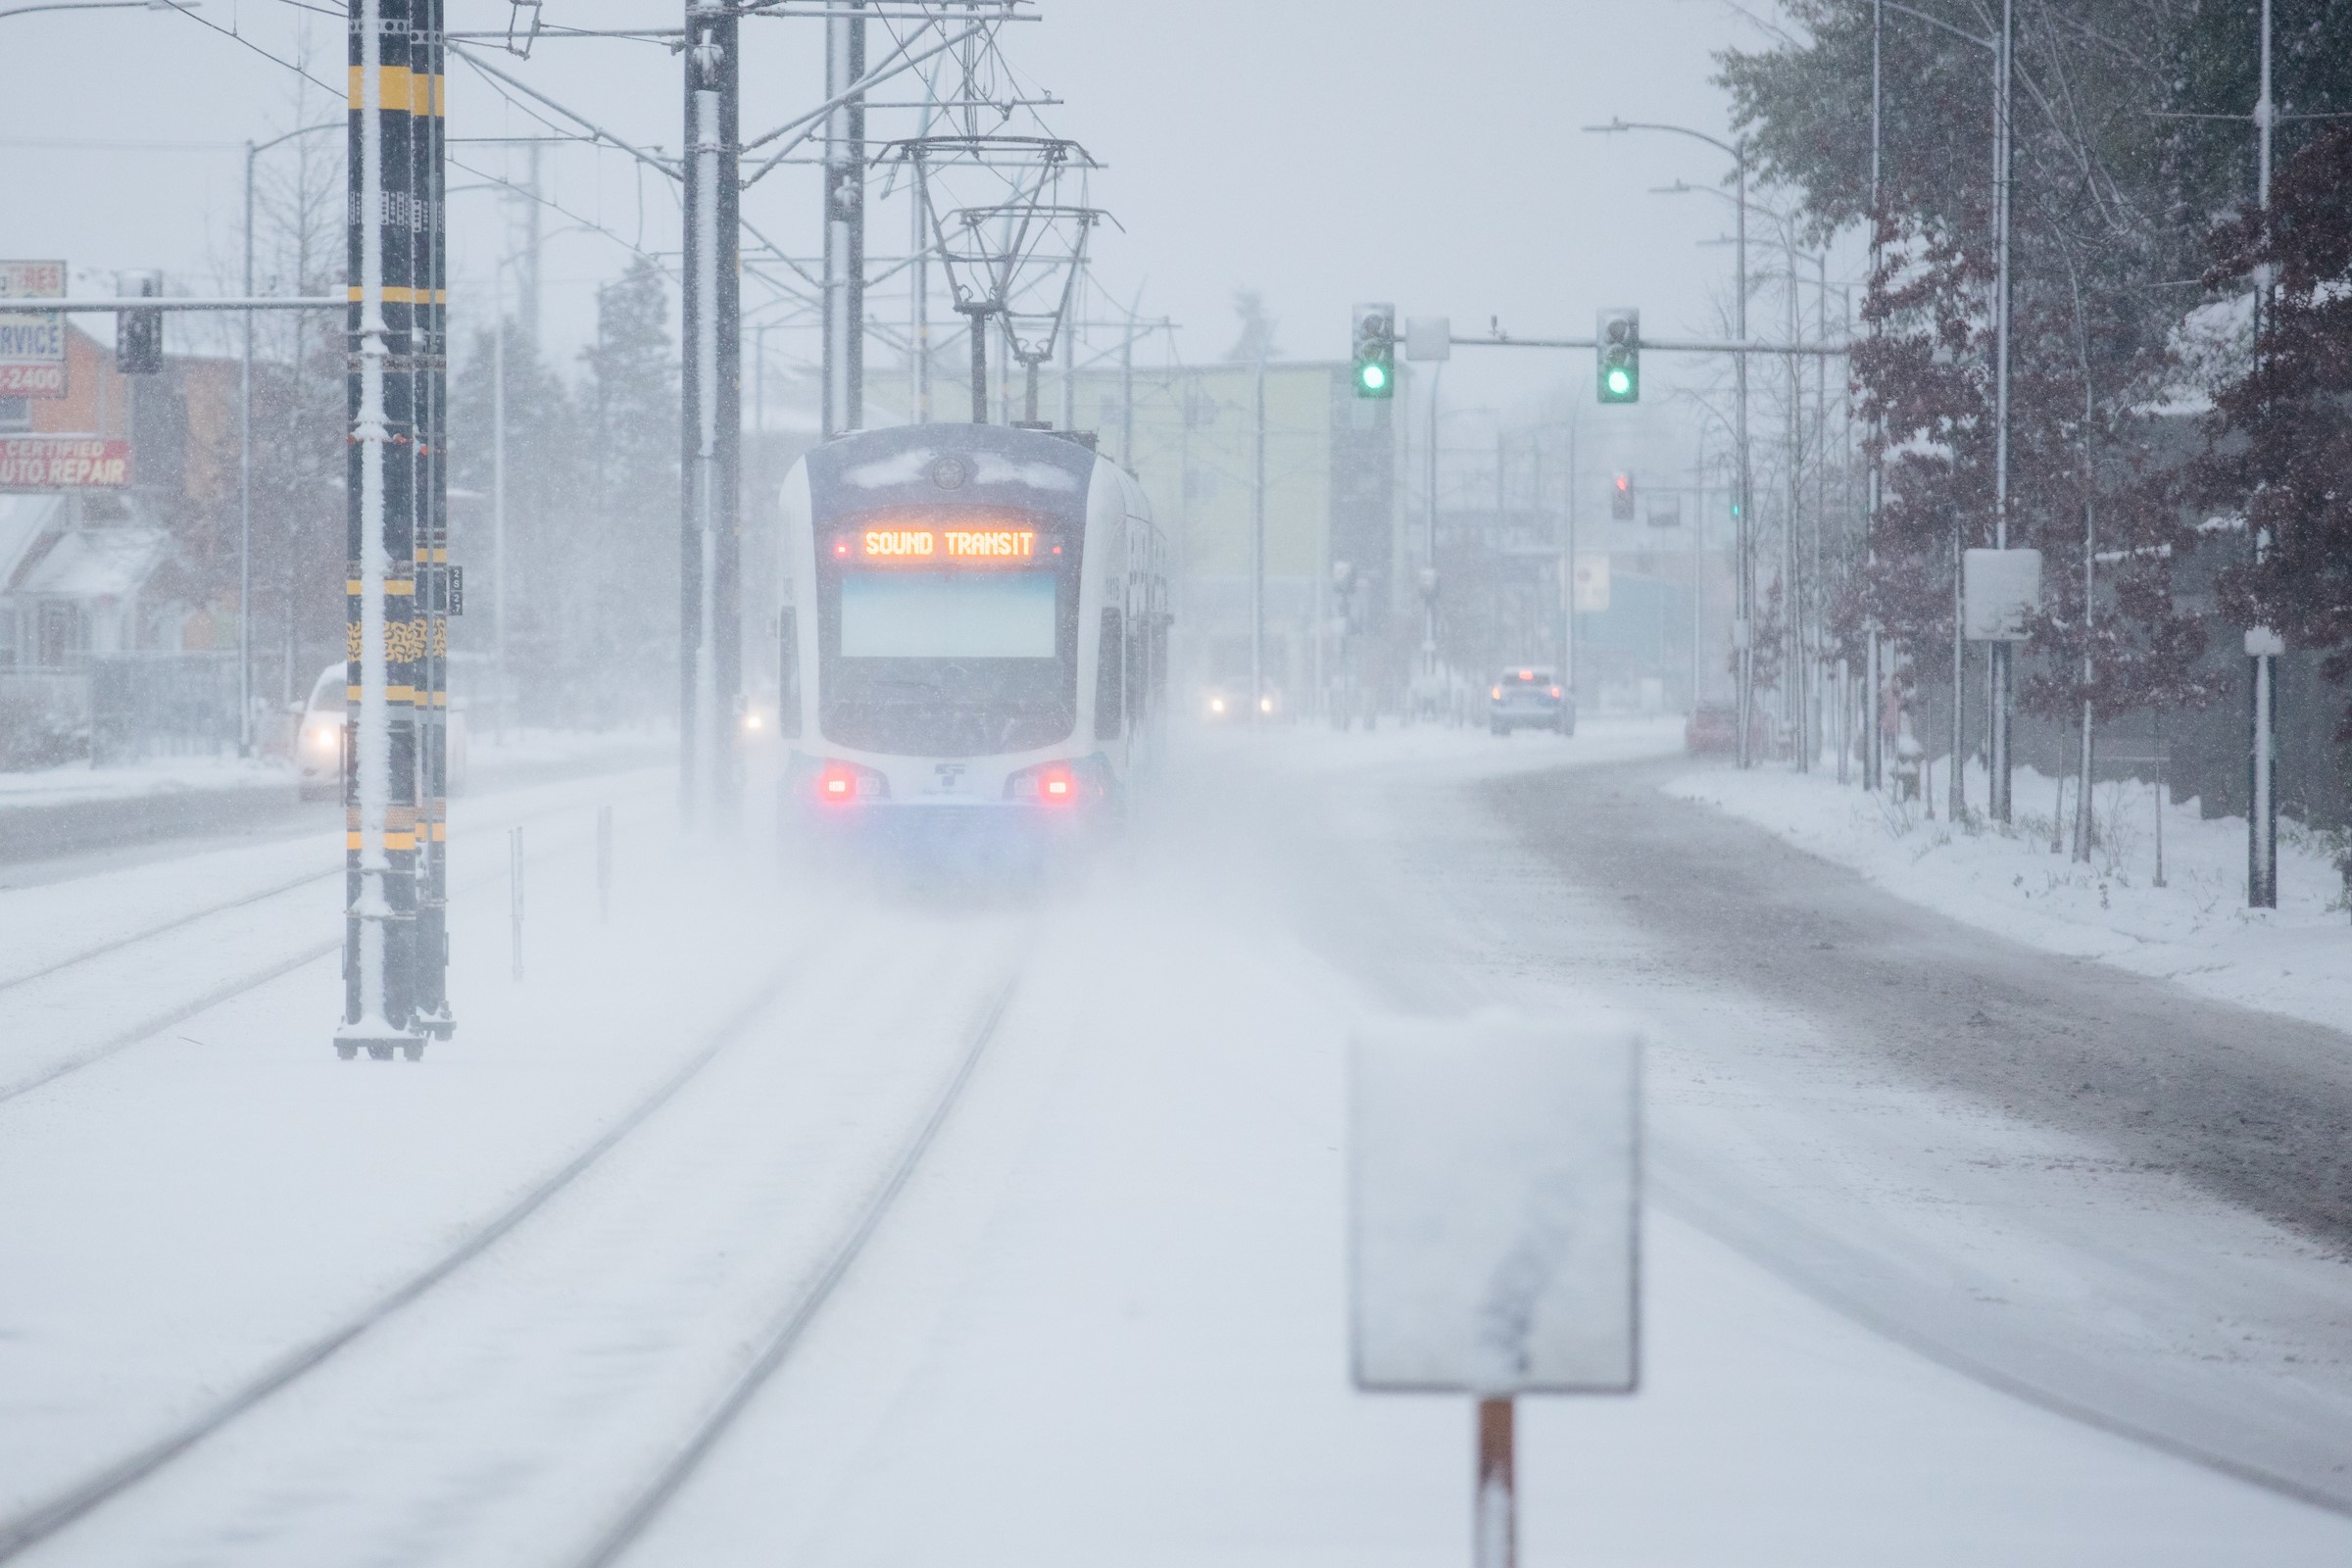 https://www.theurbanist.org/wp-content/uploads/2022/12/train-in-snow-by-Sound-Transit.jpg